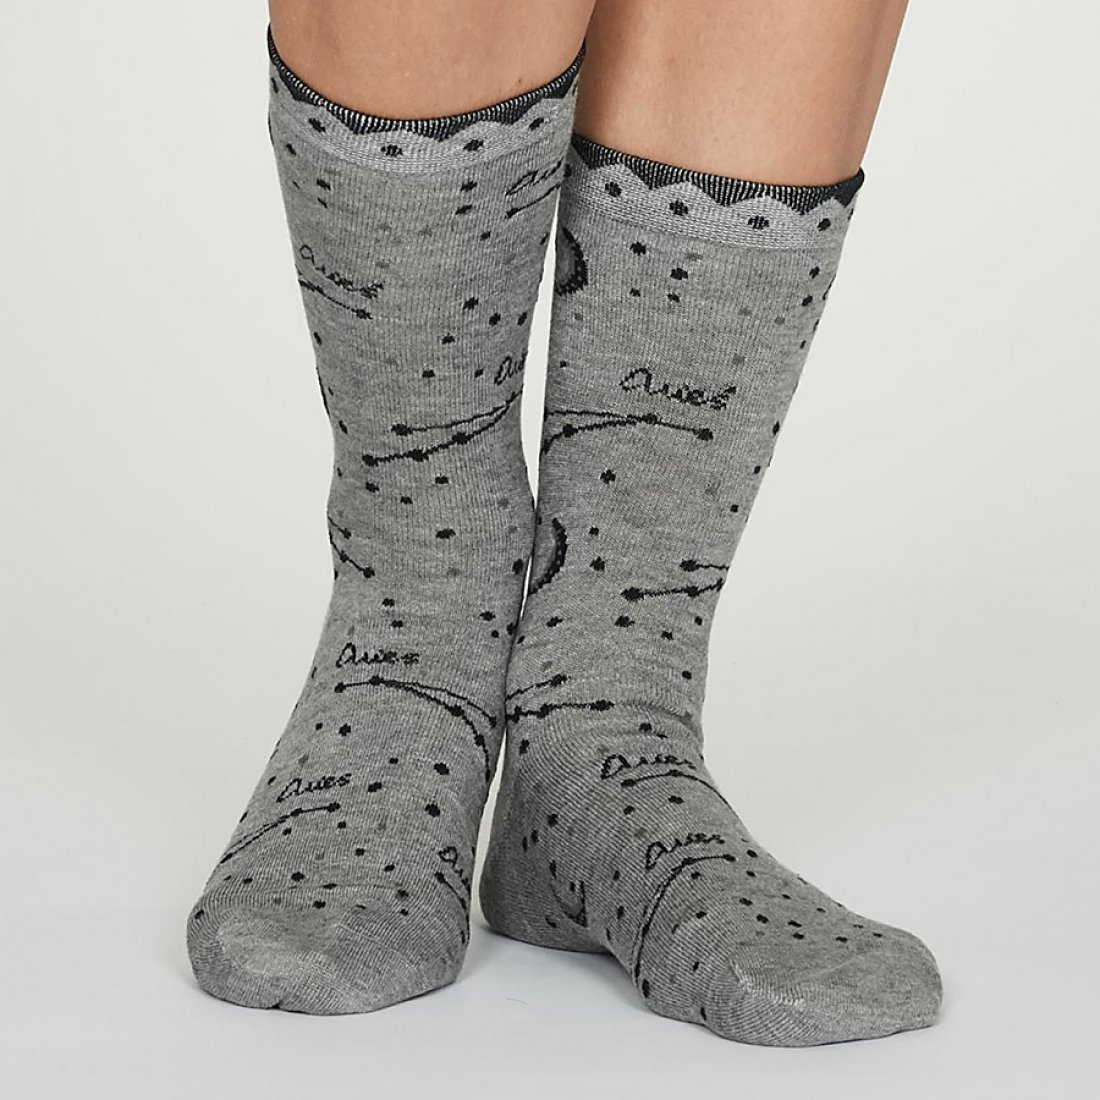 Thought Aries Zodiac Star Sign Bamboo Socks Uk4 7 Thought